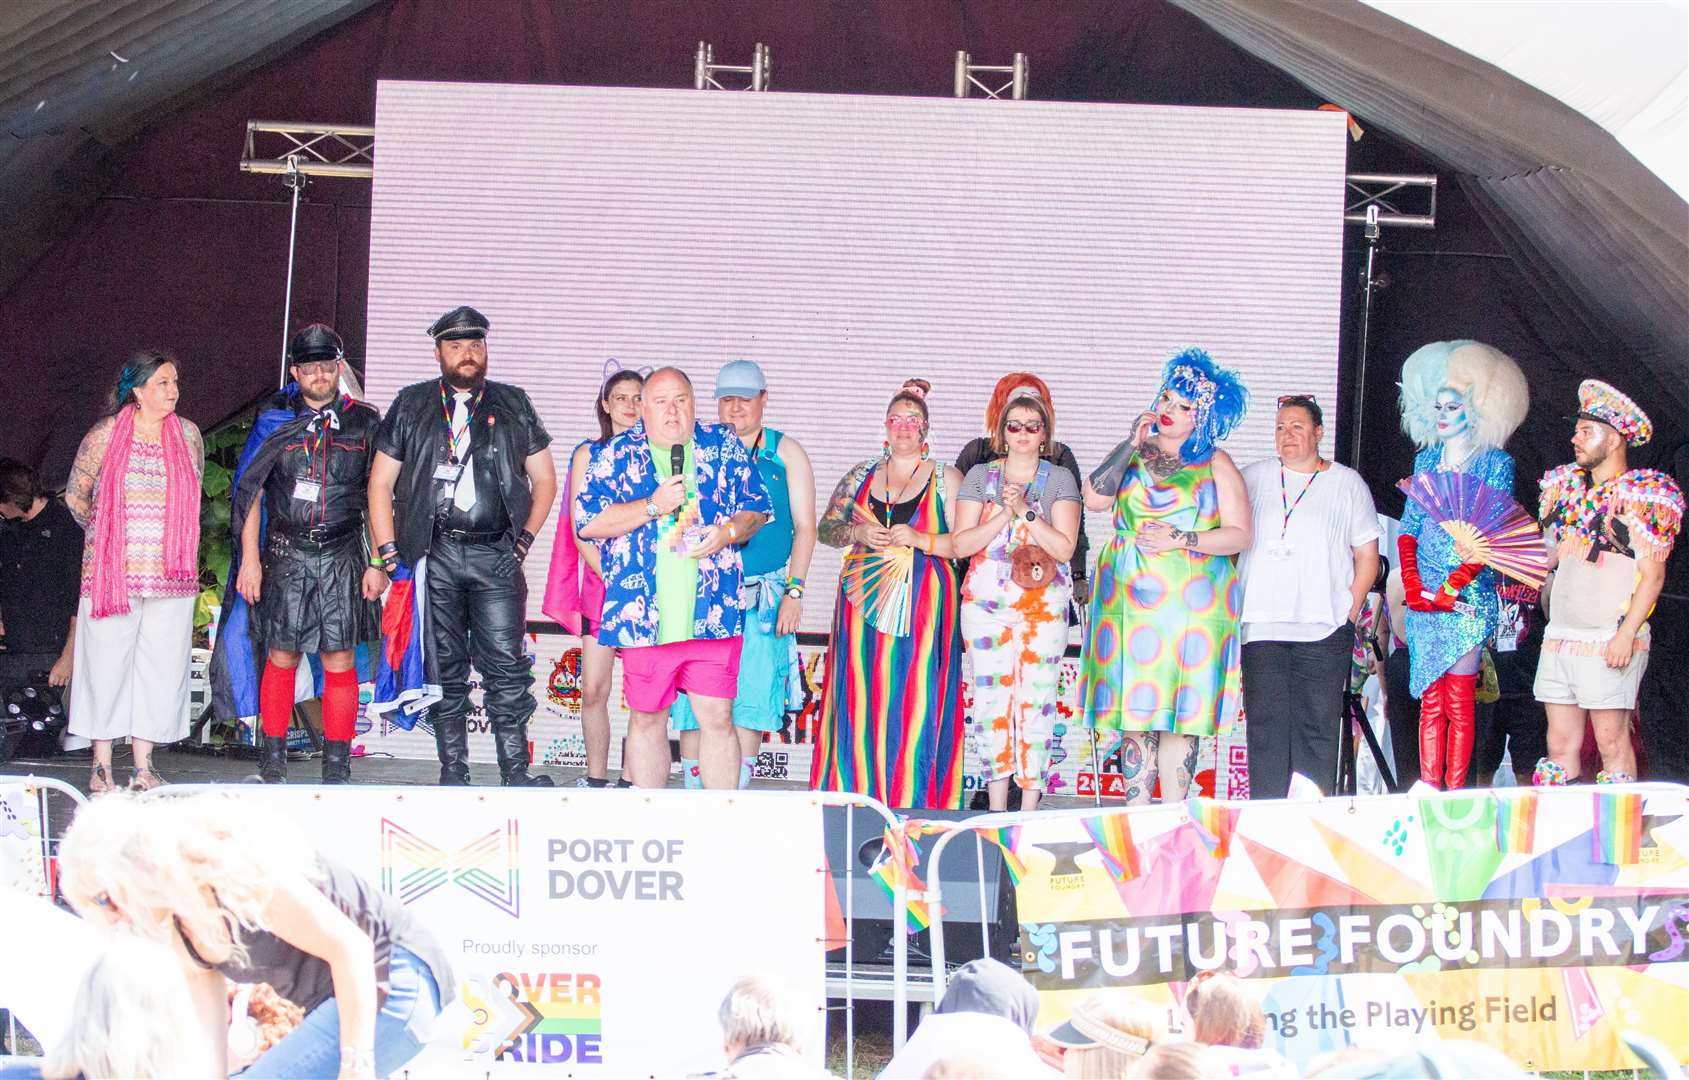 Dover Pride’s core team with Dover mayor Susan Jones, Founder of Future Foundry Lisa Oulton and Council Leader Kevin Mills. Picture: David Goodson/Dover Pride